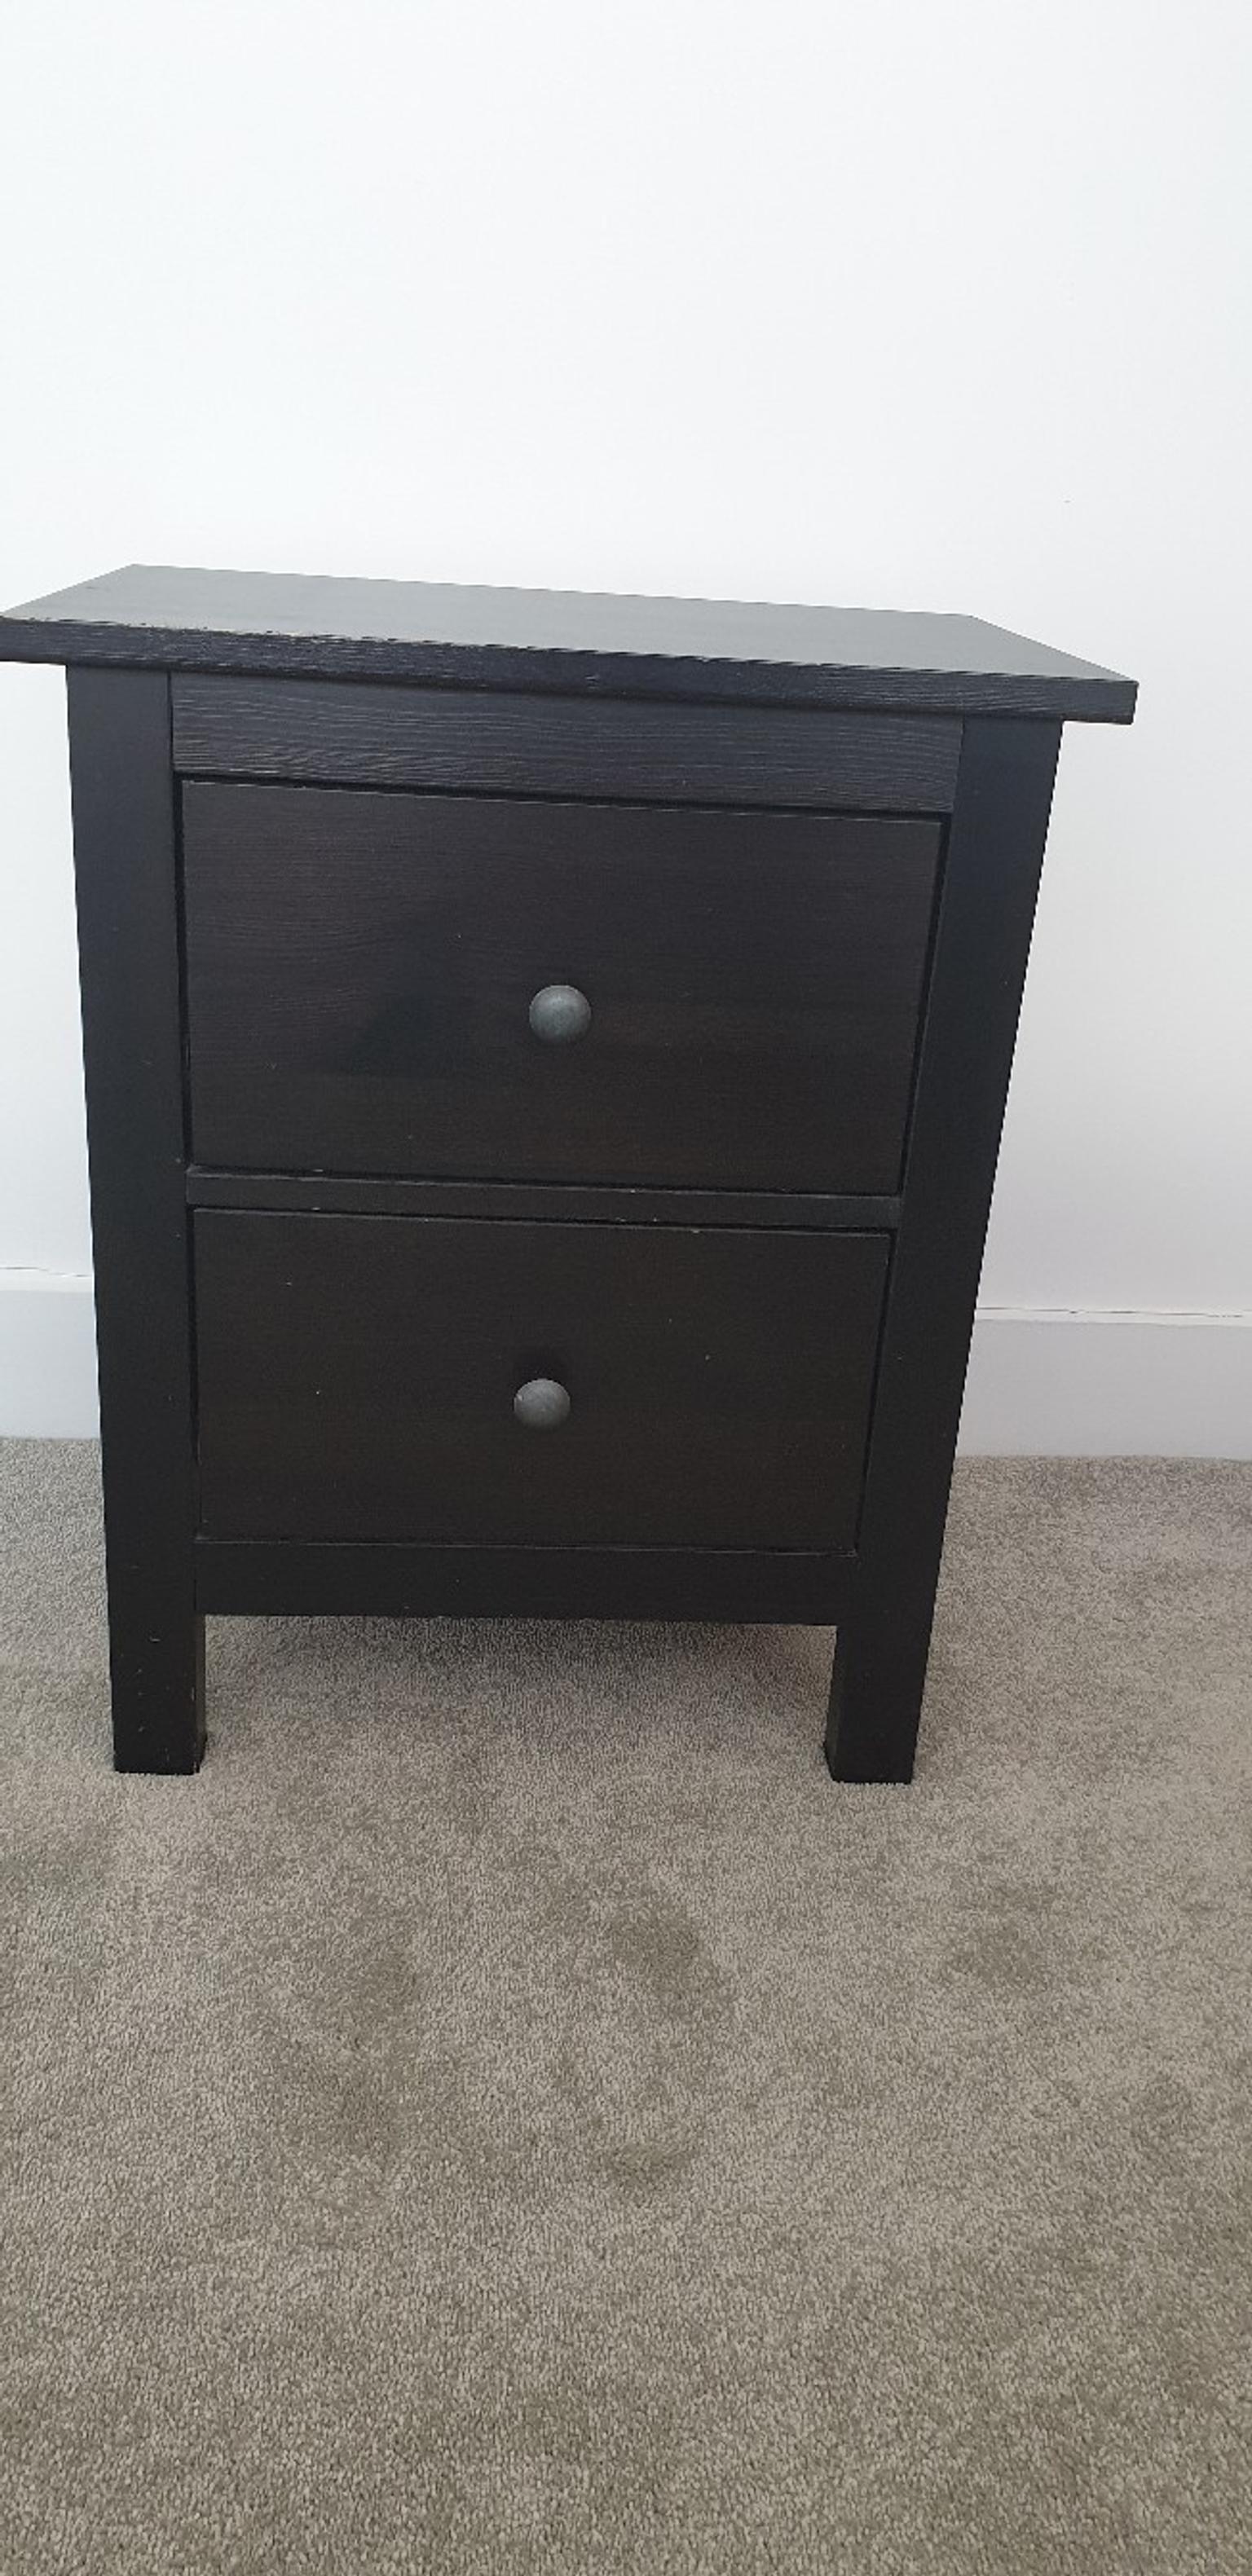 Ikea Hemnes Chest Of 2 Drawers Black Brown In London Borough Of